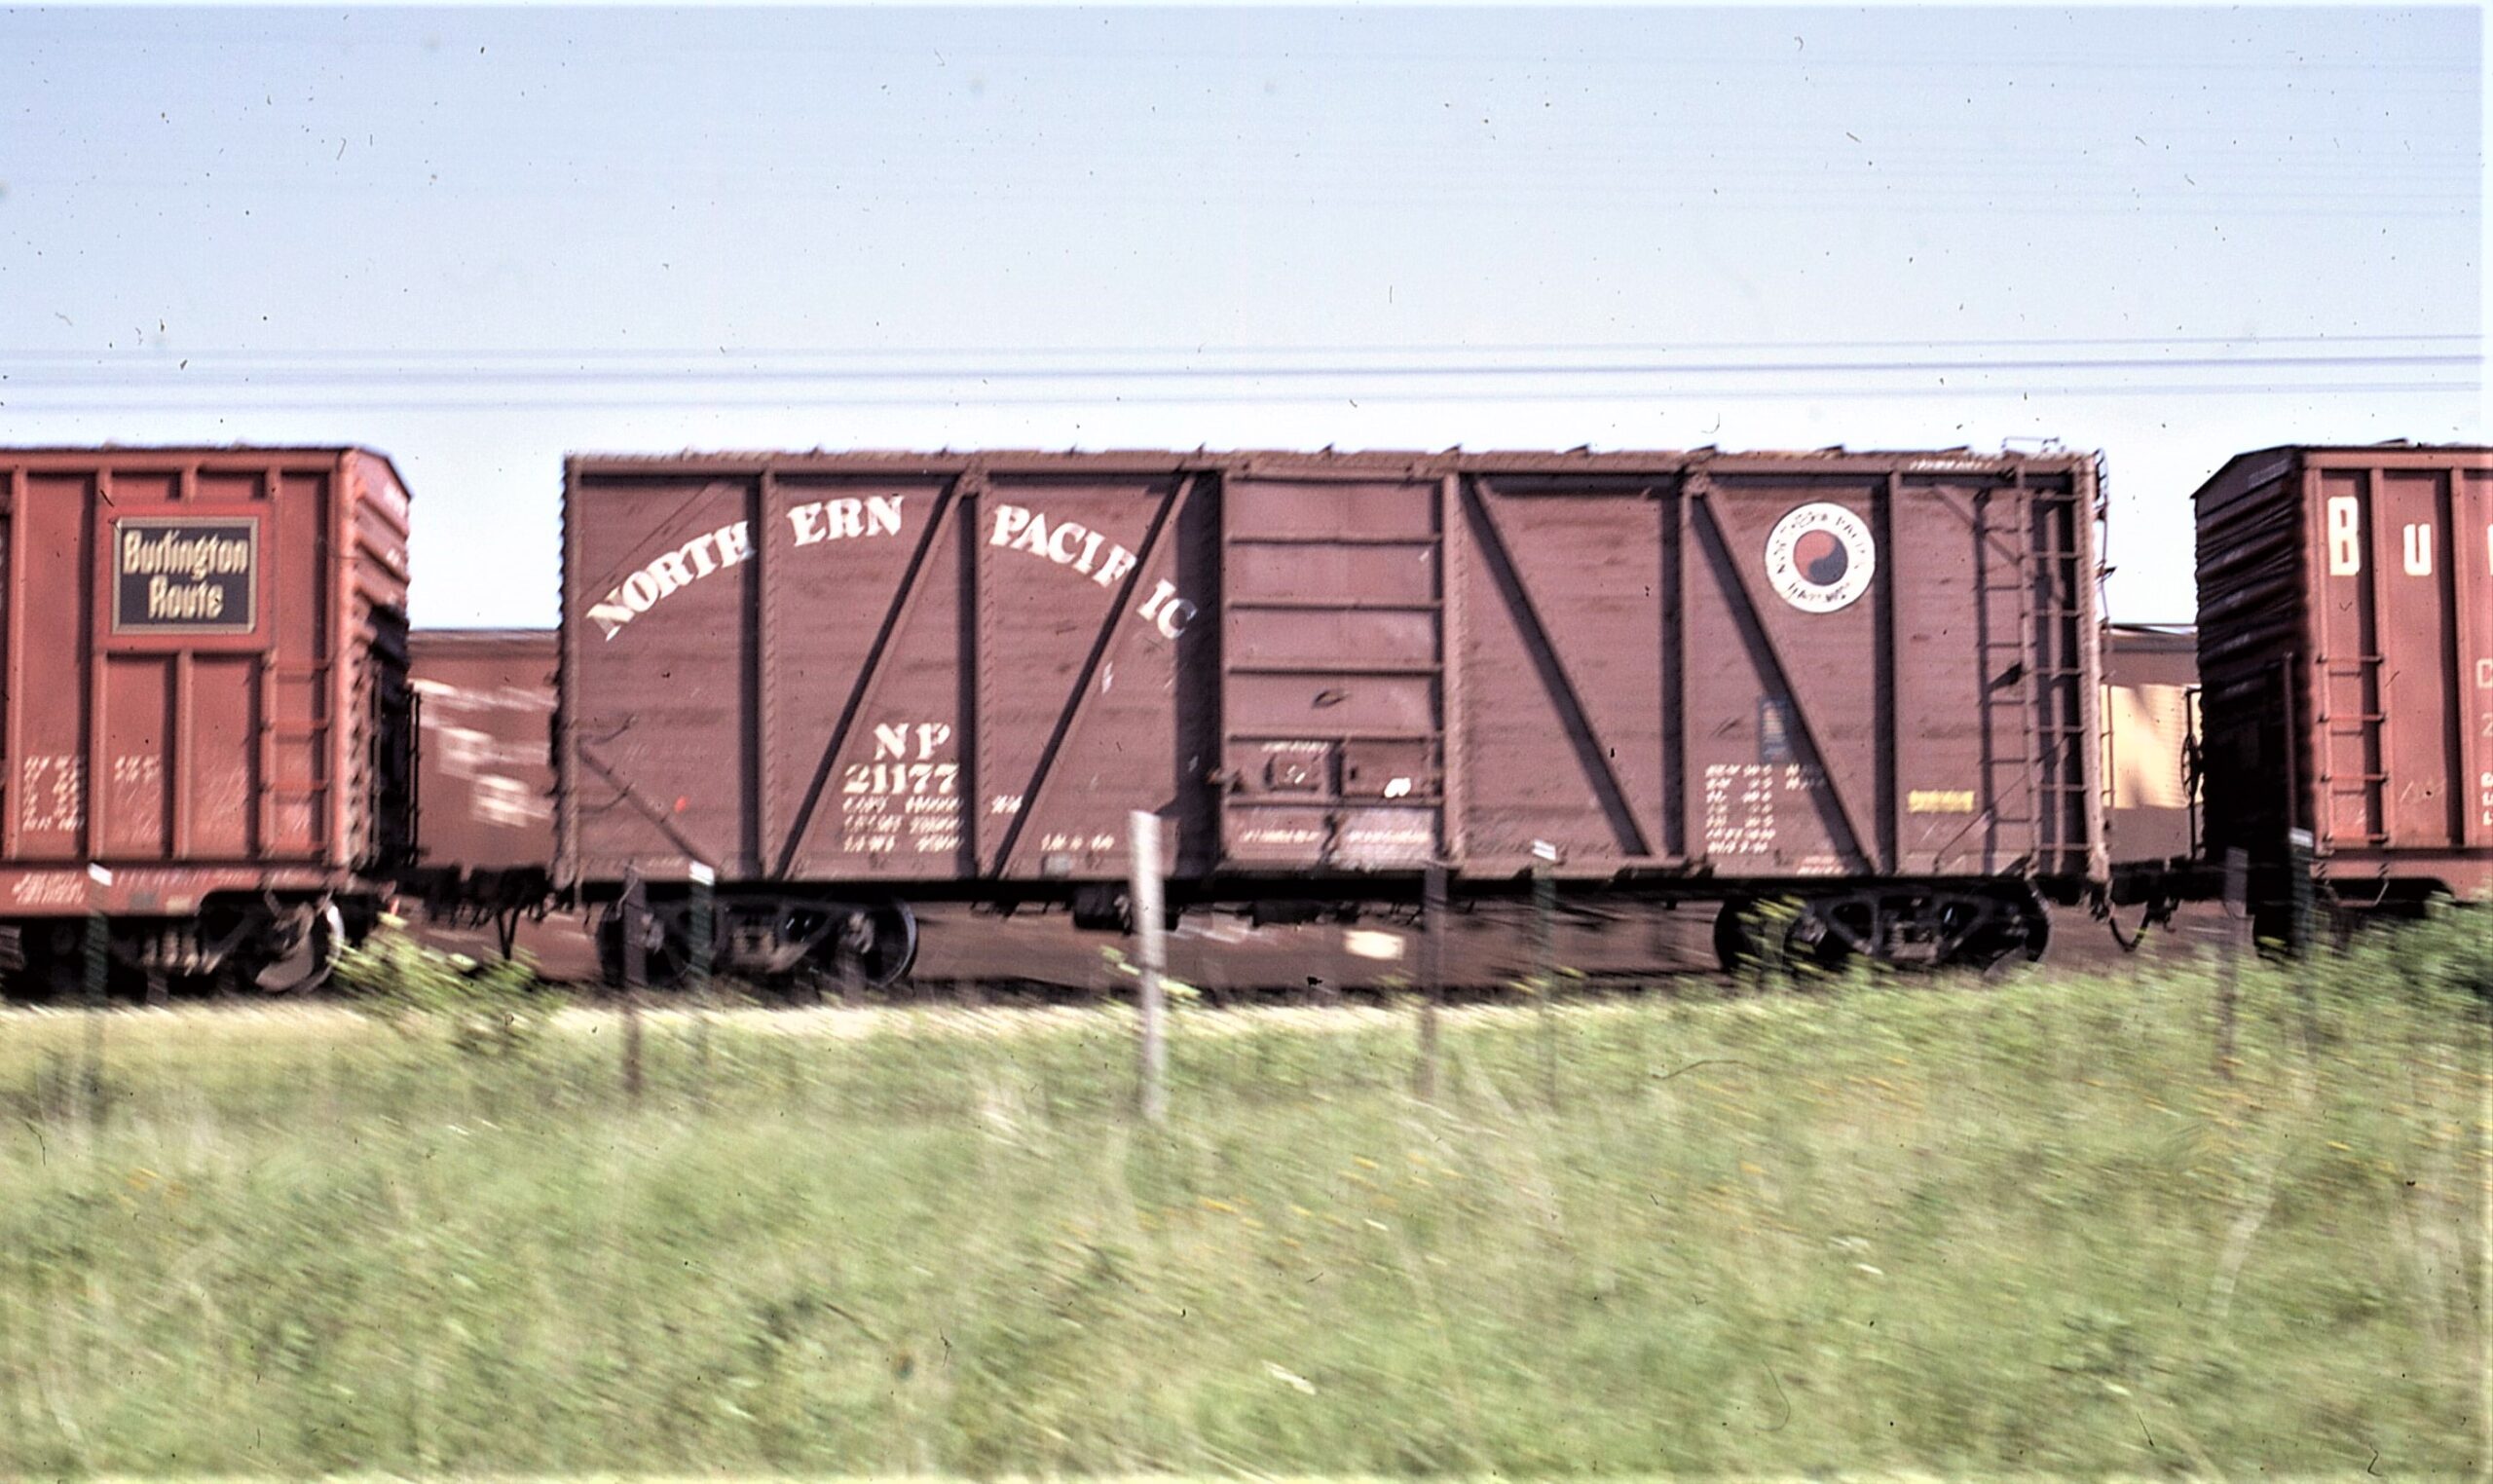 Northern Pacific | Galion, Ohio | 40 foot wooden box car 21177 | June 4, 1972